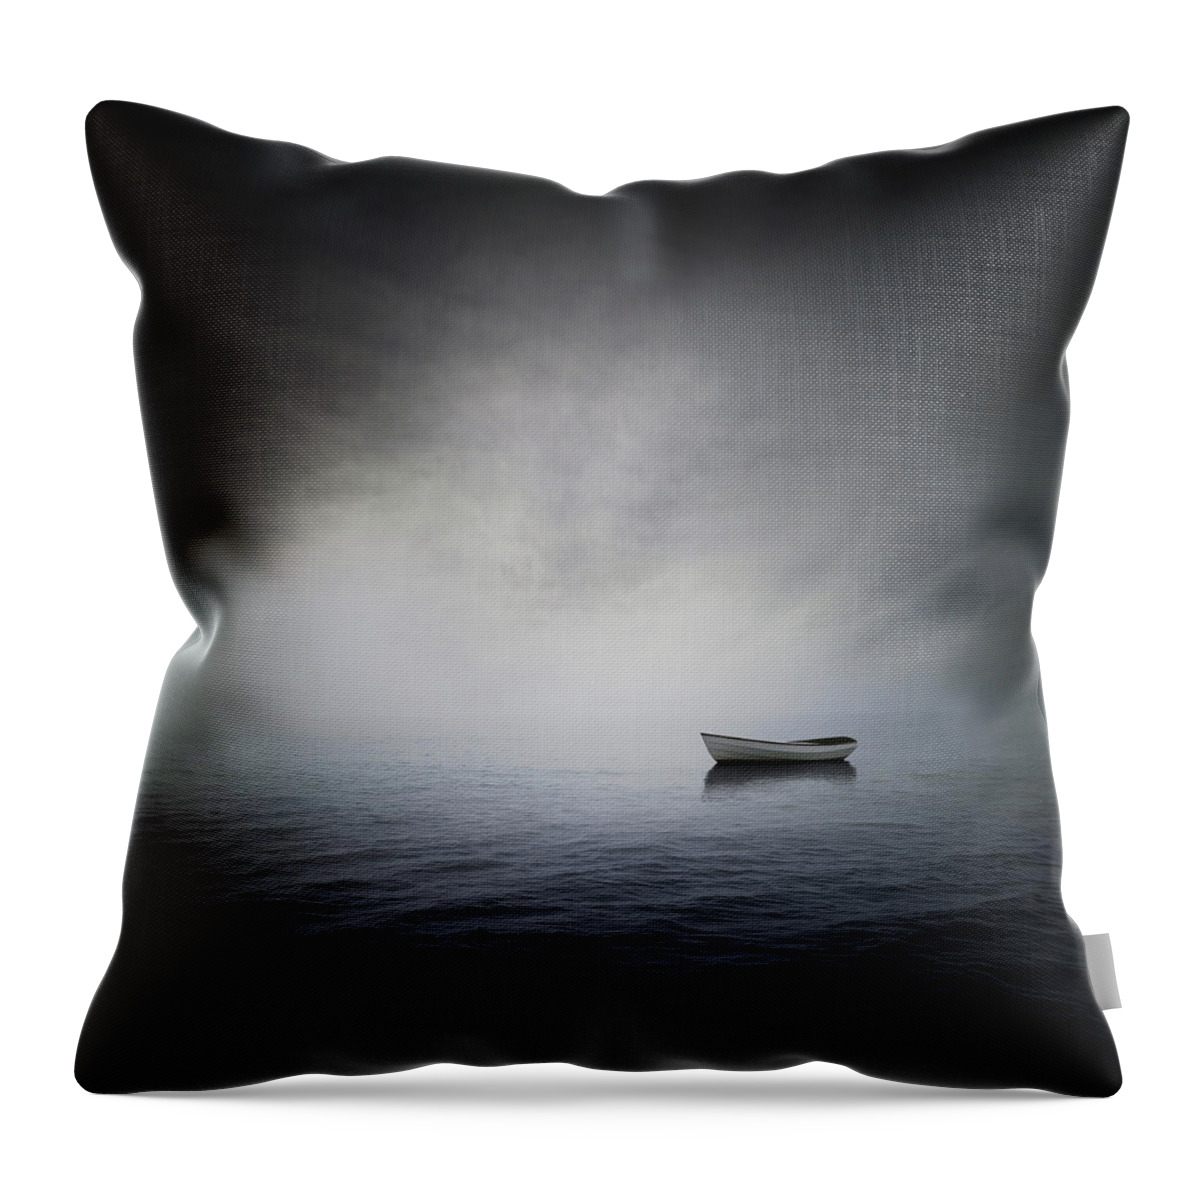 Boat Throw Pillow featuring the digital art Sea by Zoltan Toth